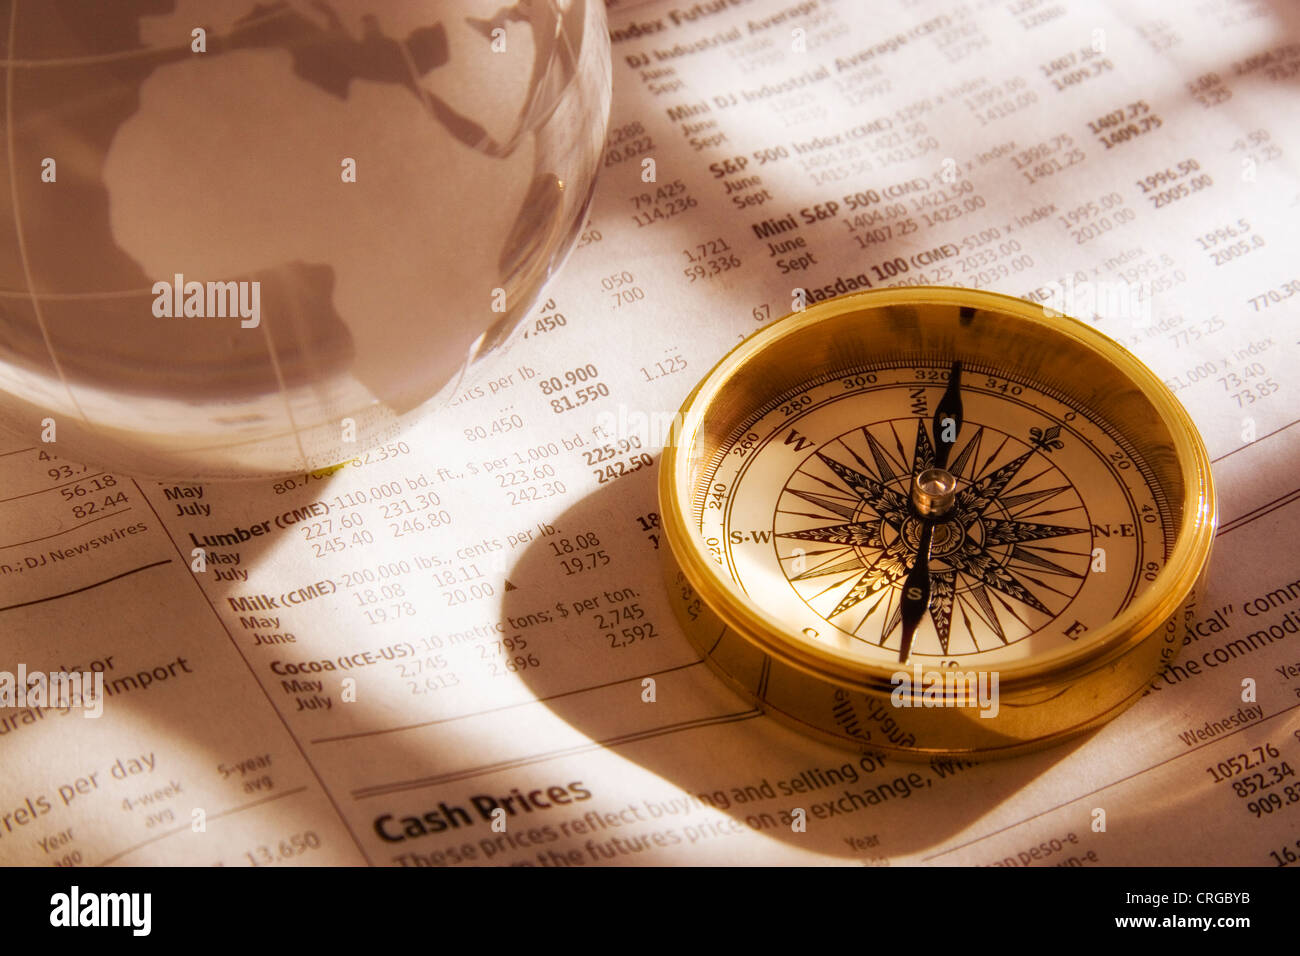 An antique gold compass on the financial page of a newspaper along with a crystal world globe. Stock Photo